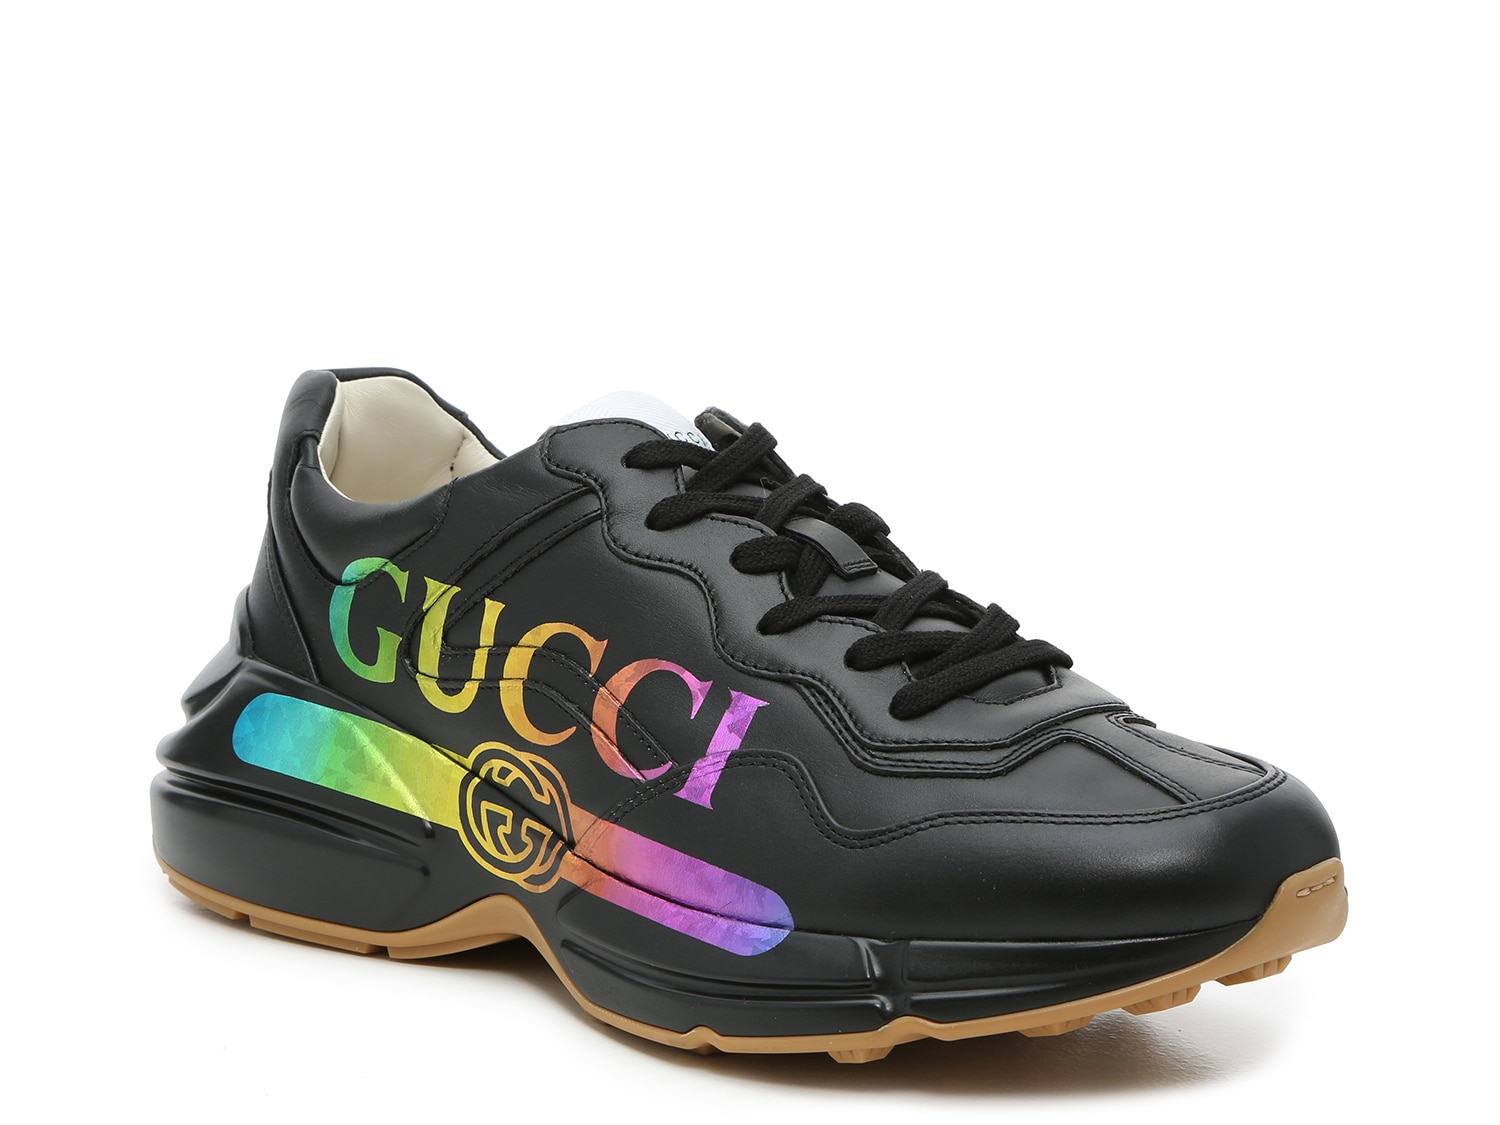 Gucci Shoes Gucci Sneakers Loafers Boots Sandals Dsw